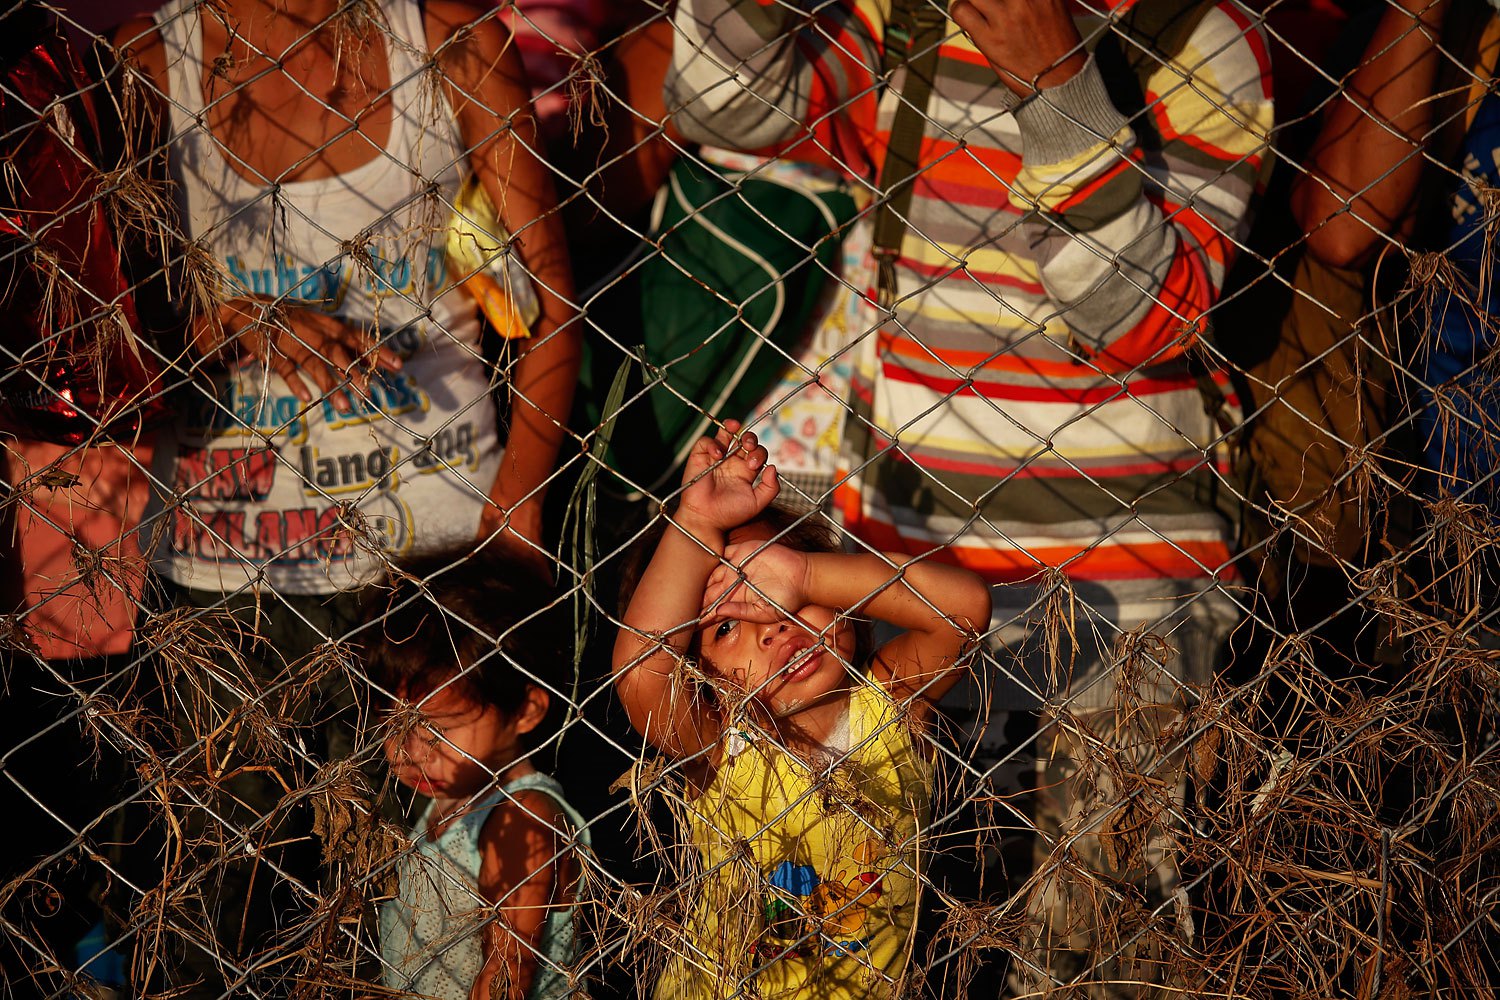 People who trying to leave the devastated town look through the fence of Tacloban airport, which remains a point of exodus for survivors of typhoon Haiyan, November 17, 2013.